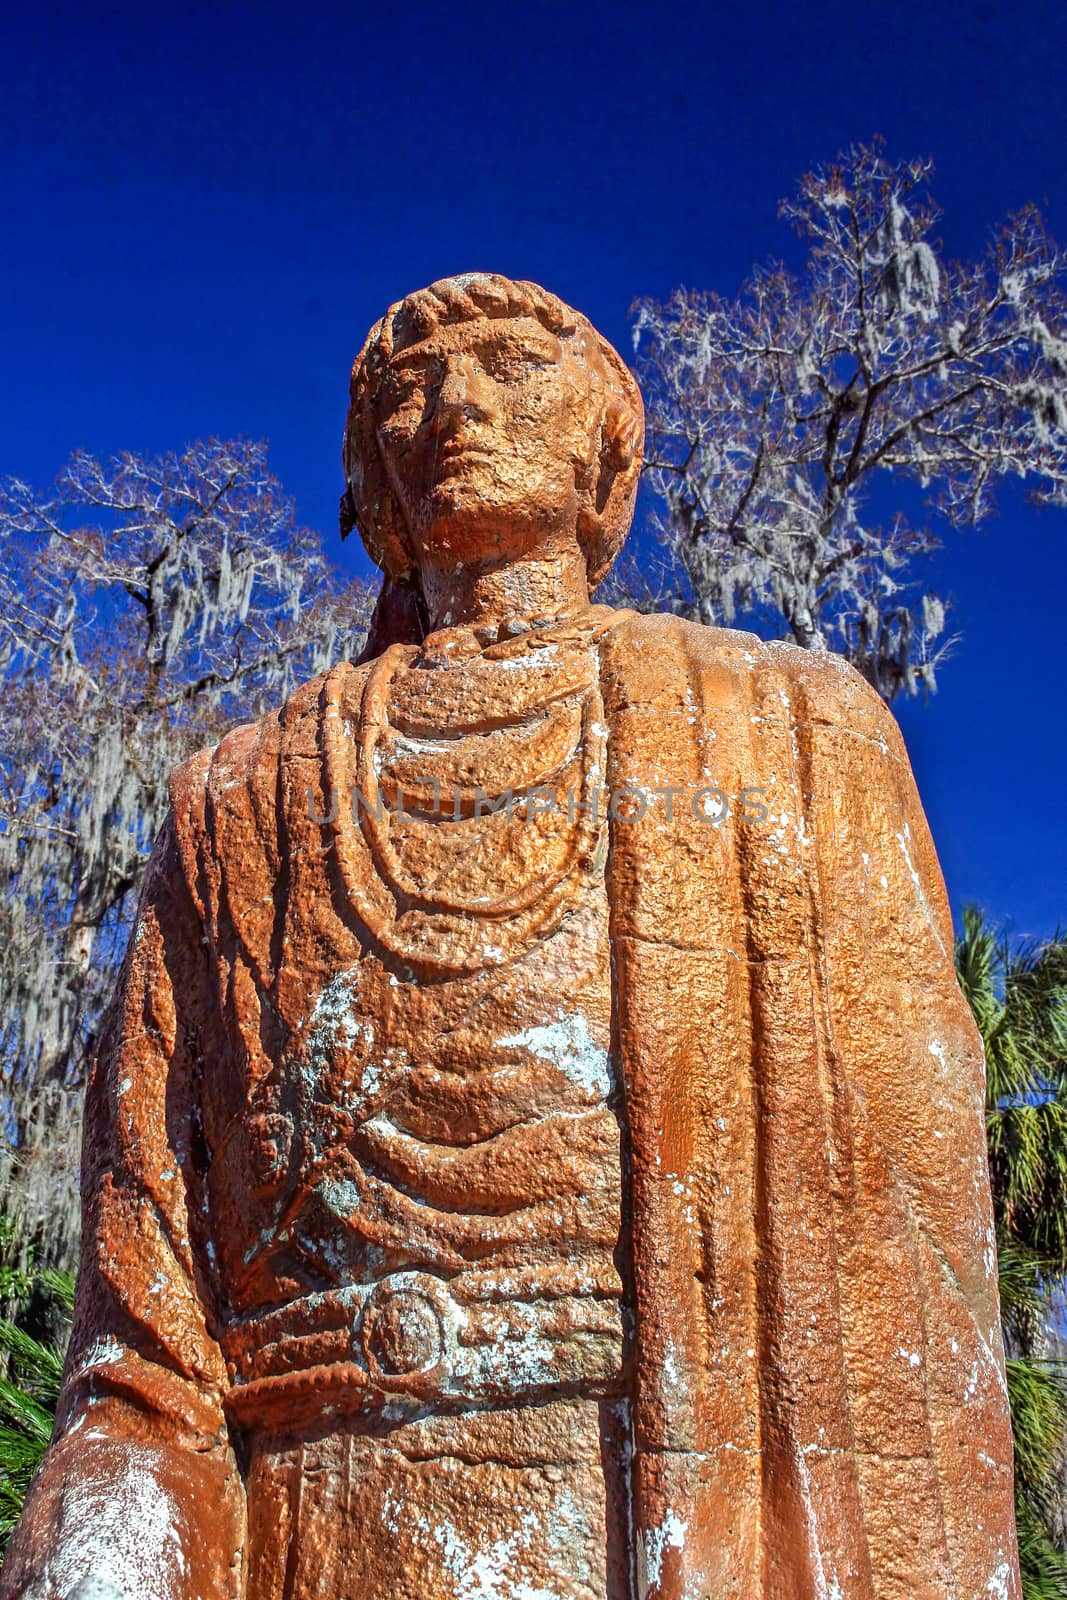 An orange / brown colored statue with blue sky